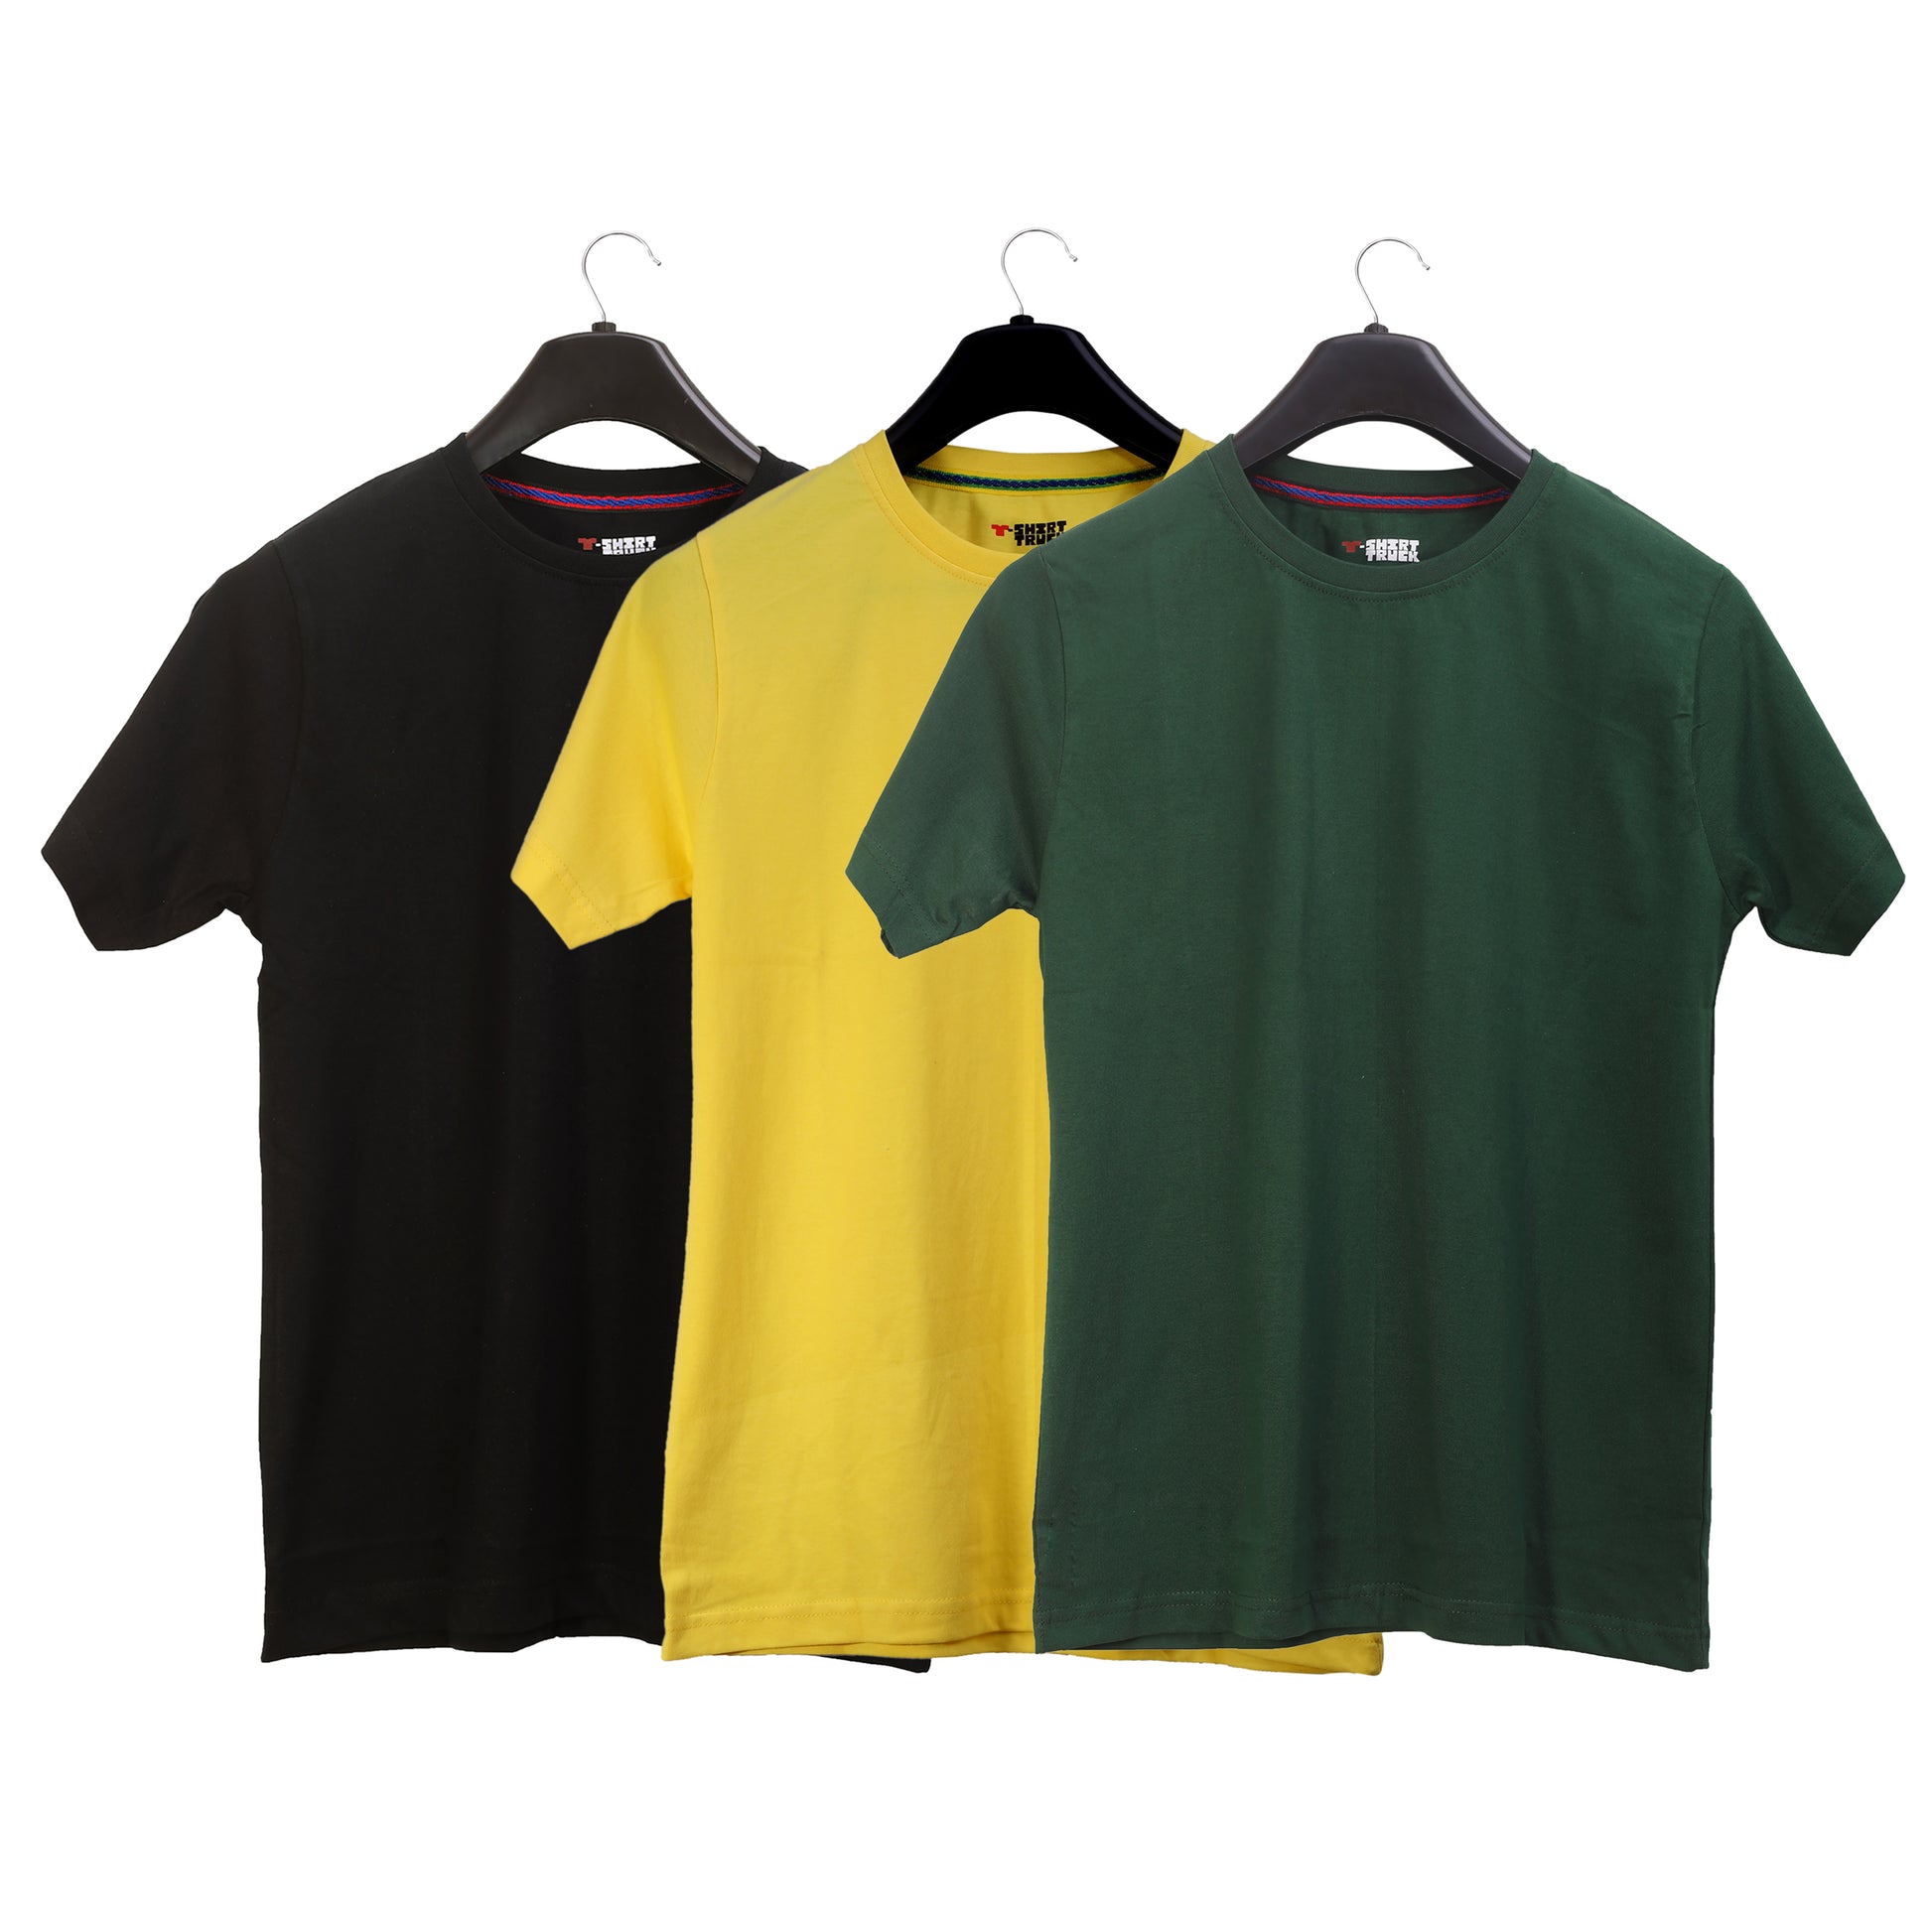 Unisex Round Neck Plain Solid Combo Pack of 3 T-shirts Black, Yellow, & Green